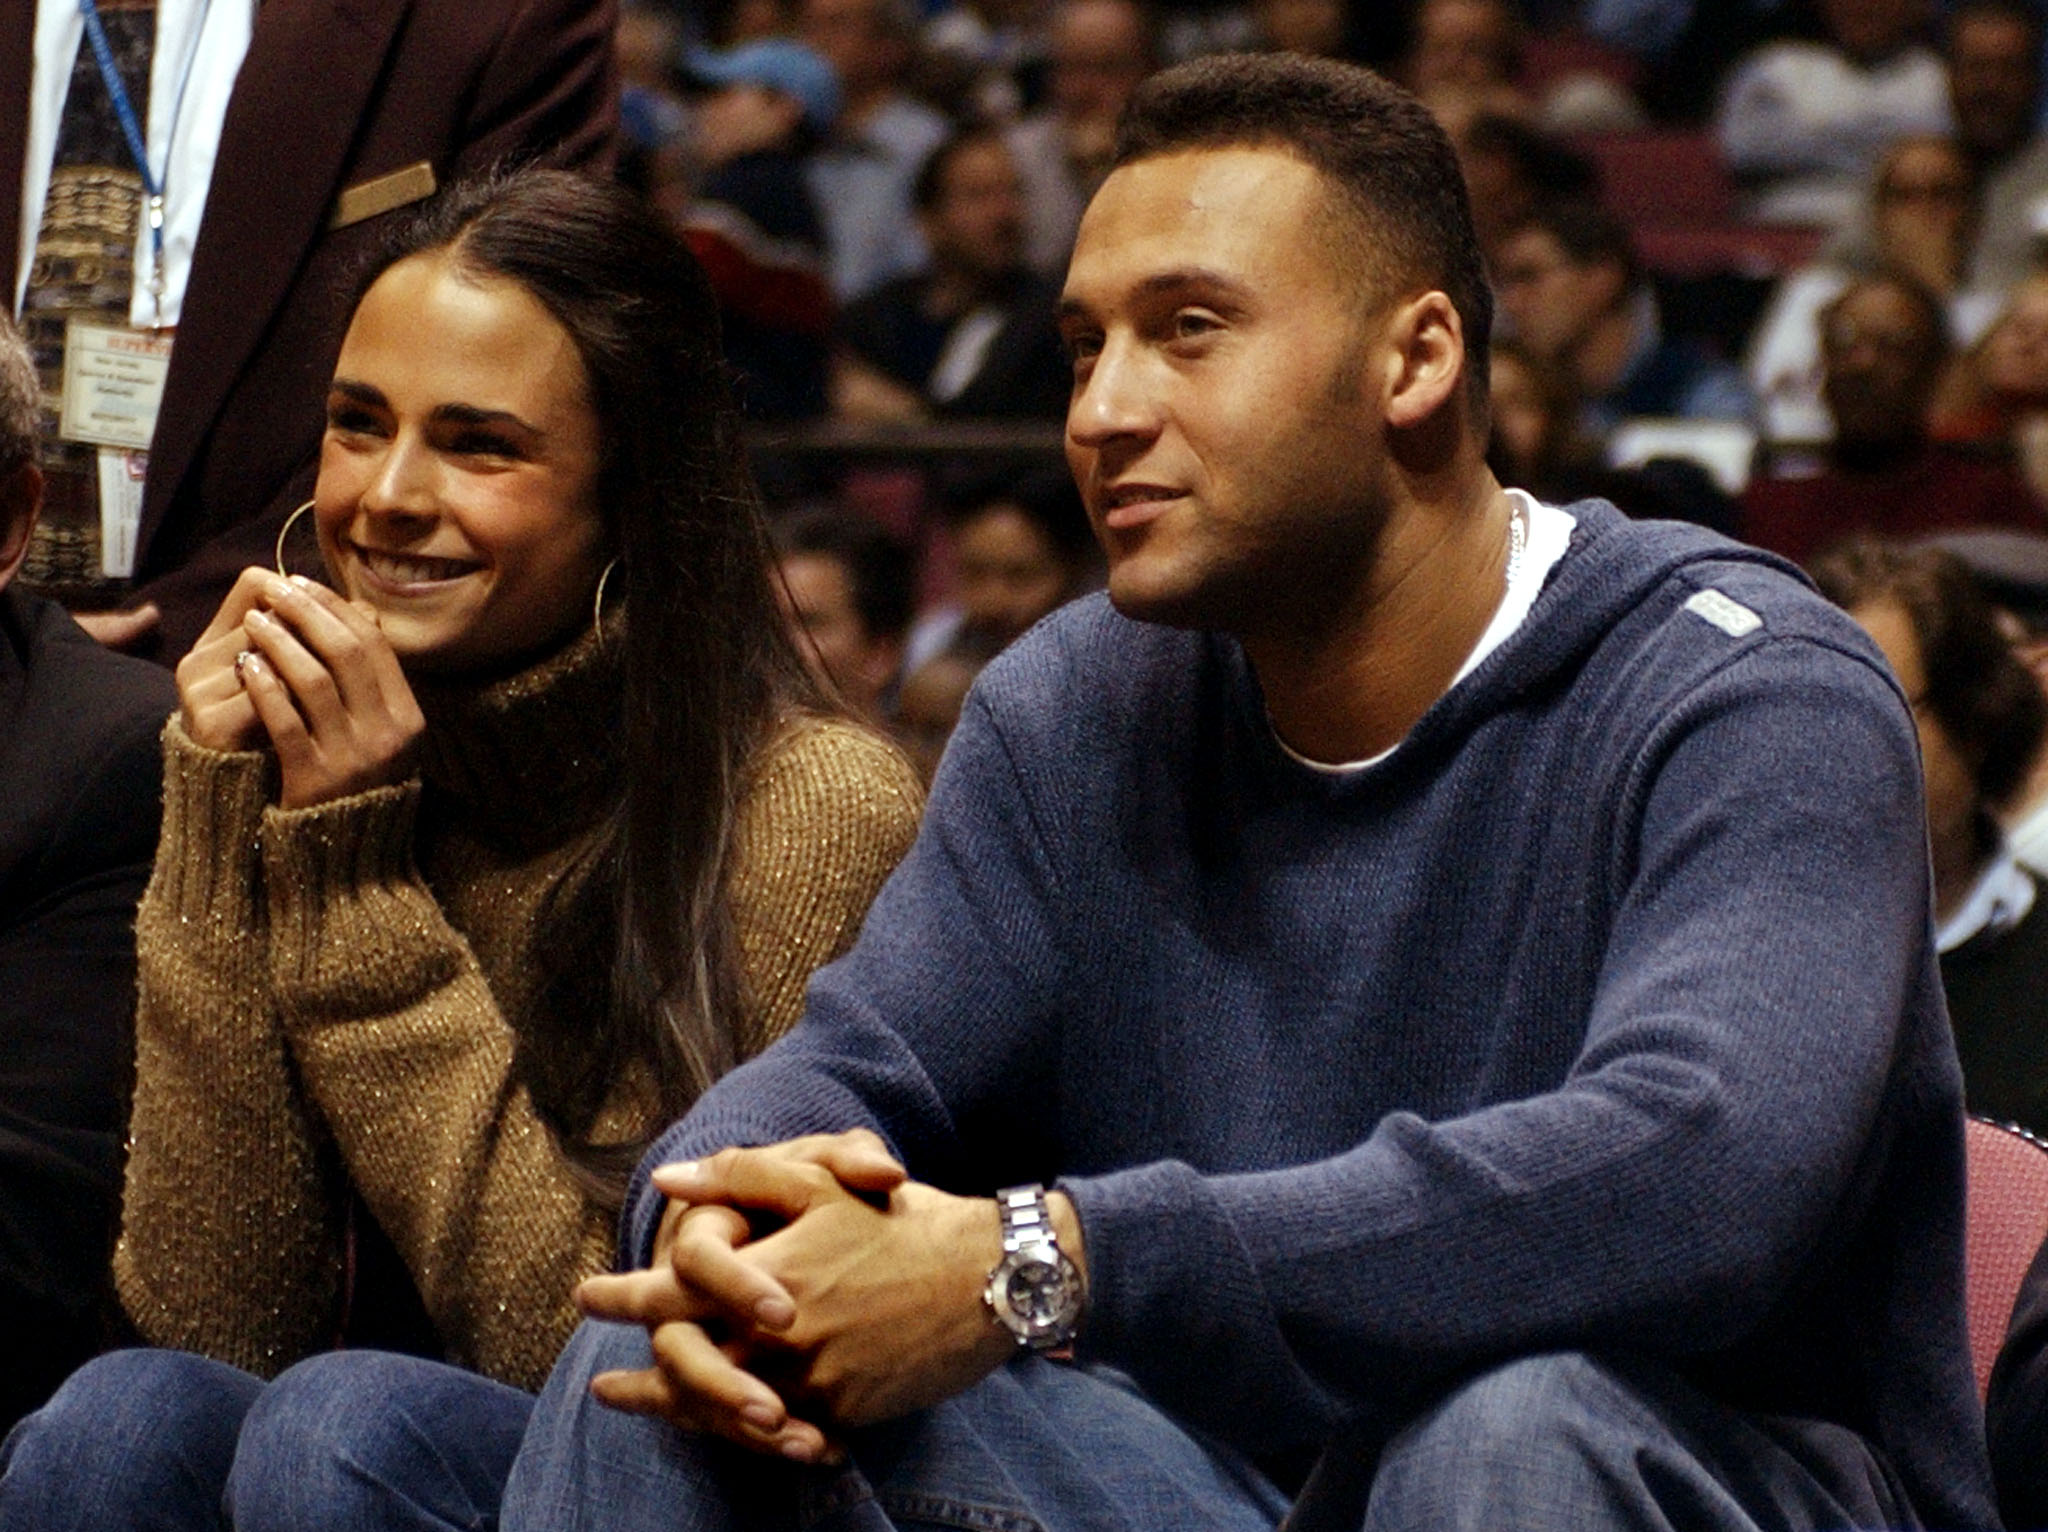 Derek Jeter and actress Jordana Brewster sit courtside on December 19 2002, at Continental Arena in East Rutherford, New Jersey. | Source: Getty Images